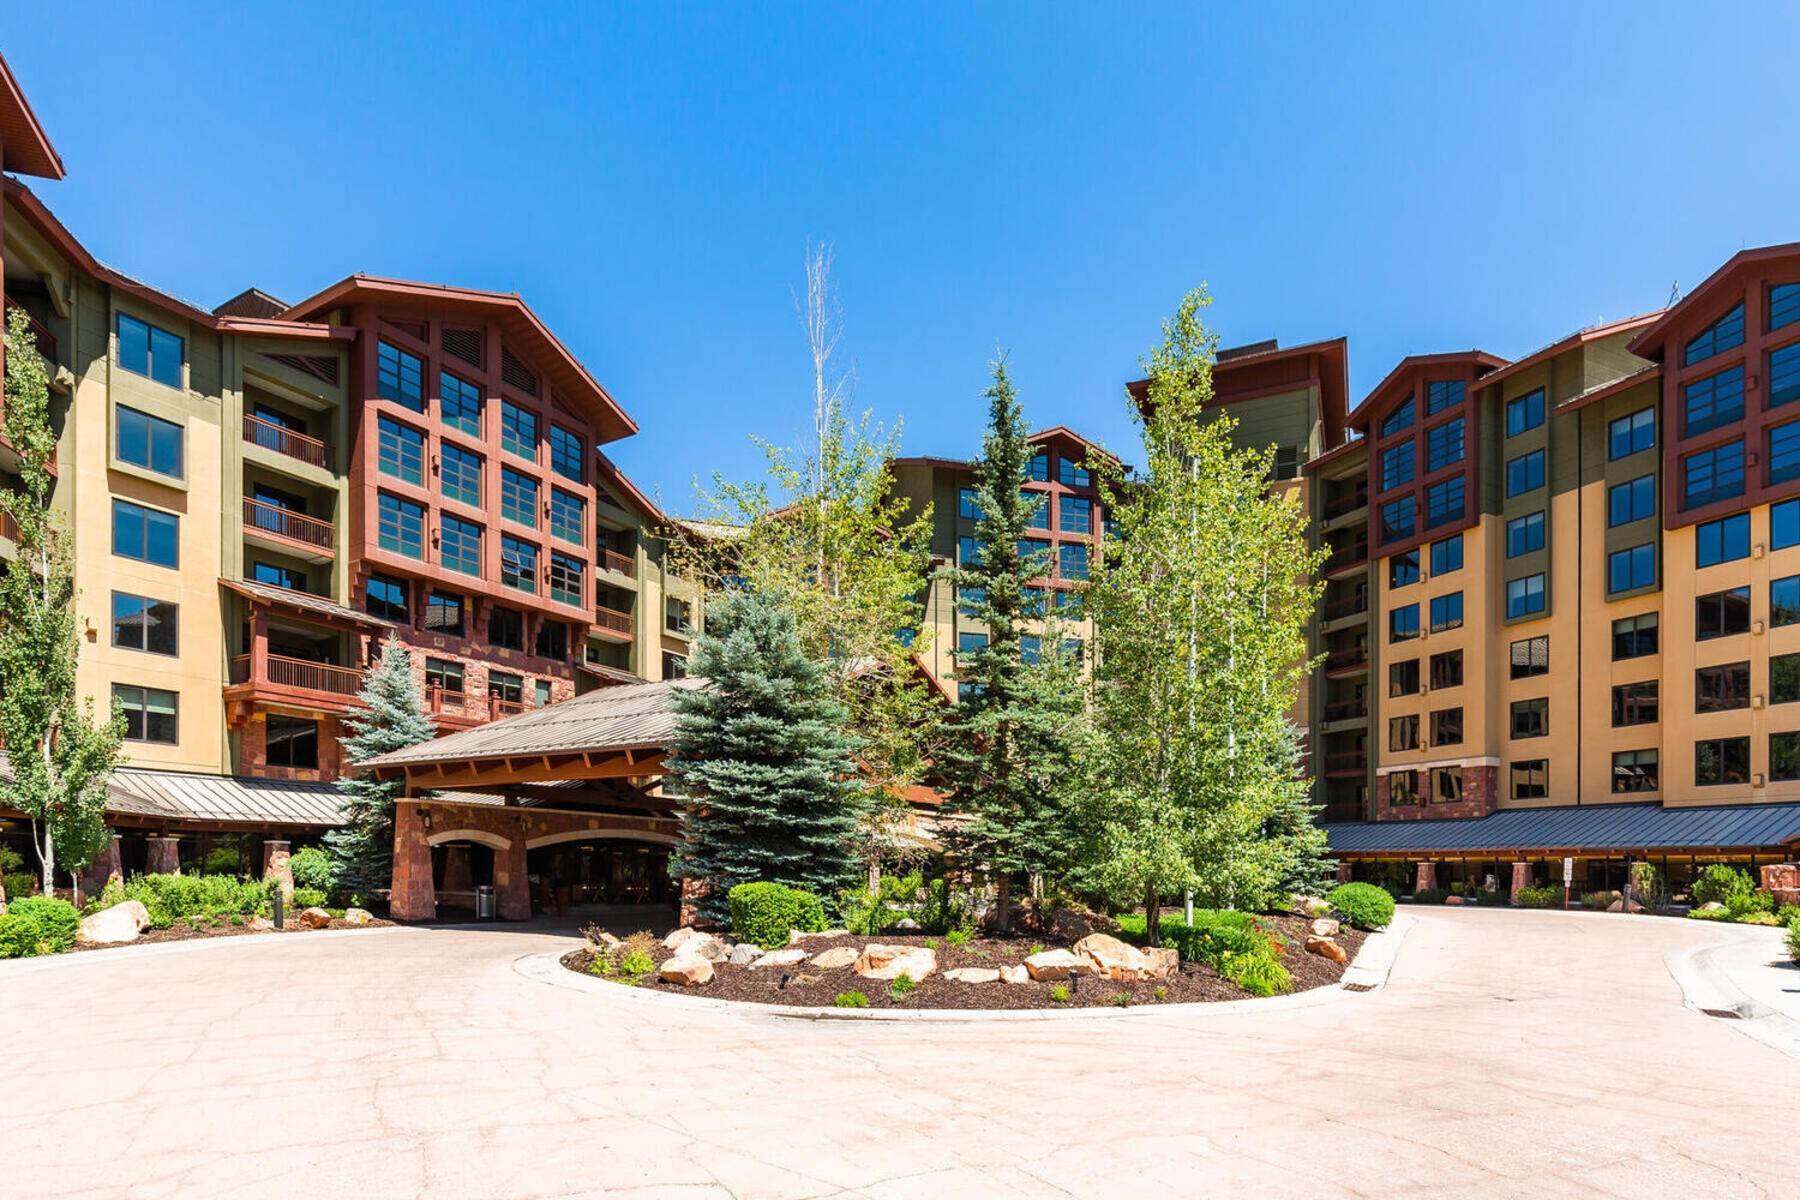 Condominiums for Sale at Ski In/Out at Canyons Village 3855 Grand Summit Dr #463 Q4 Park City, Utah 84098 United States